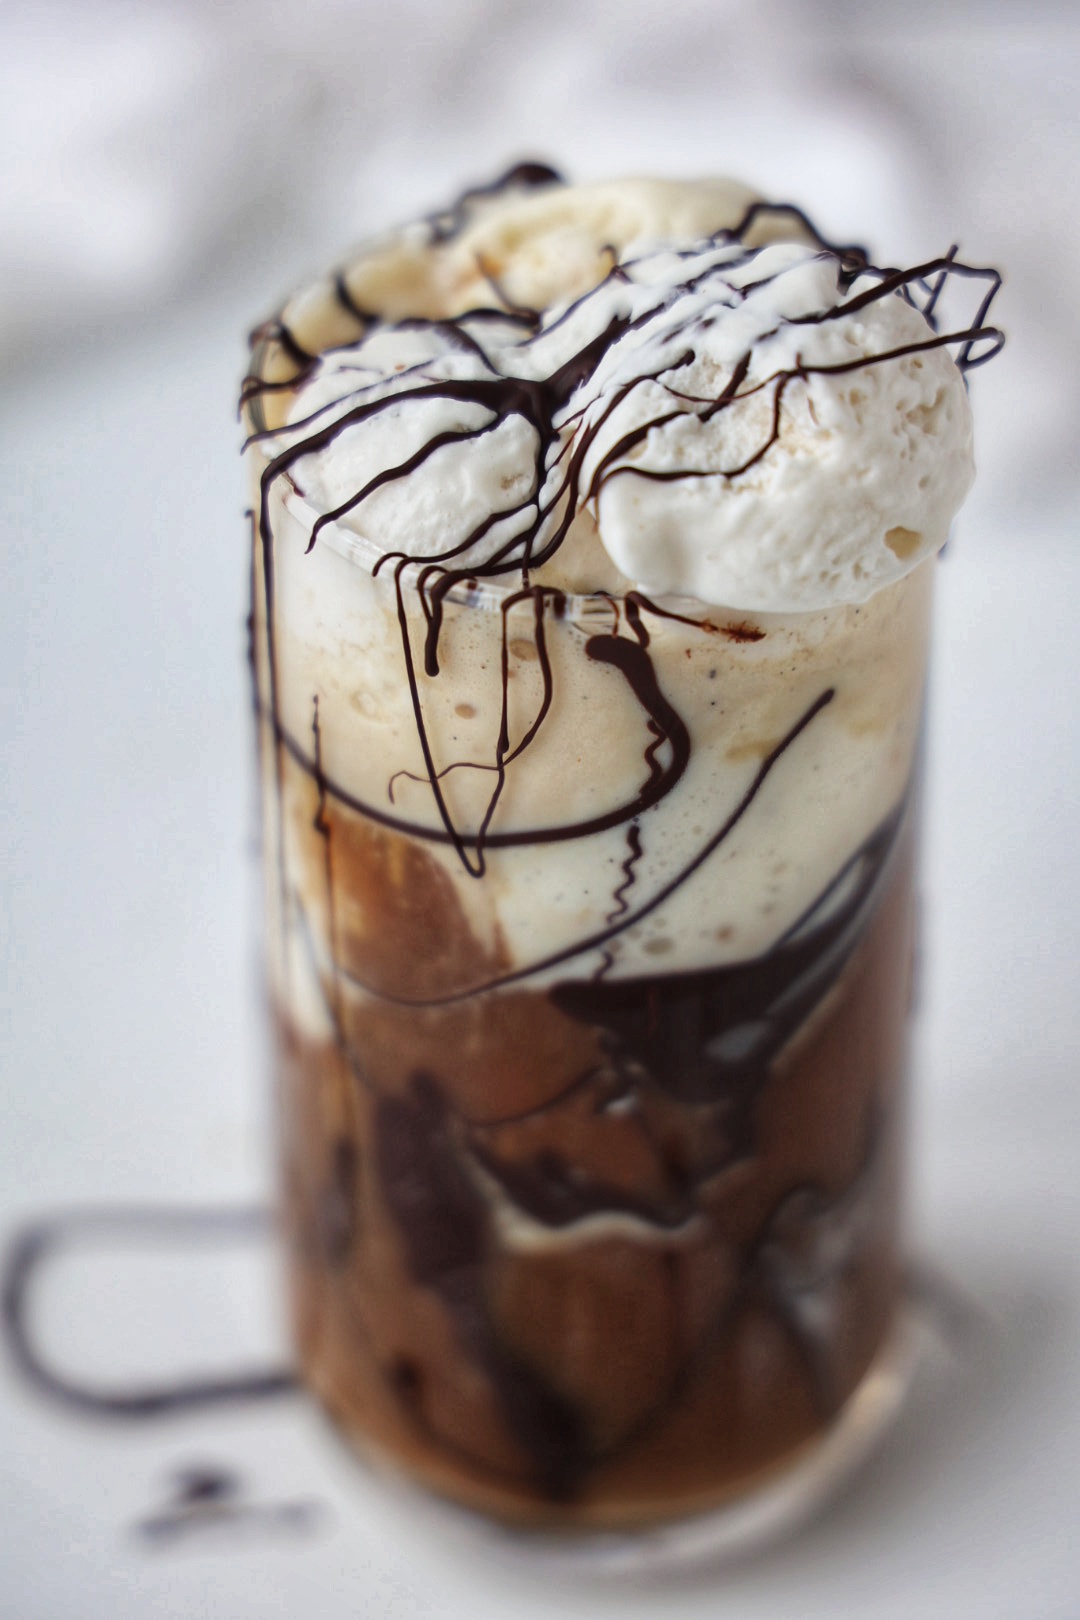 A glass with ice cream, cold brew, chocolate drizzle, and topped with whipped cream.